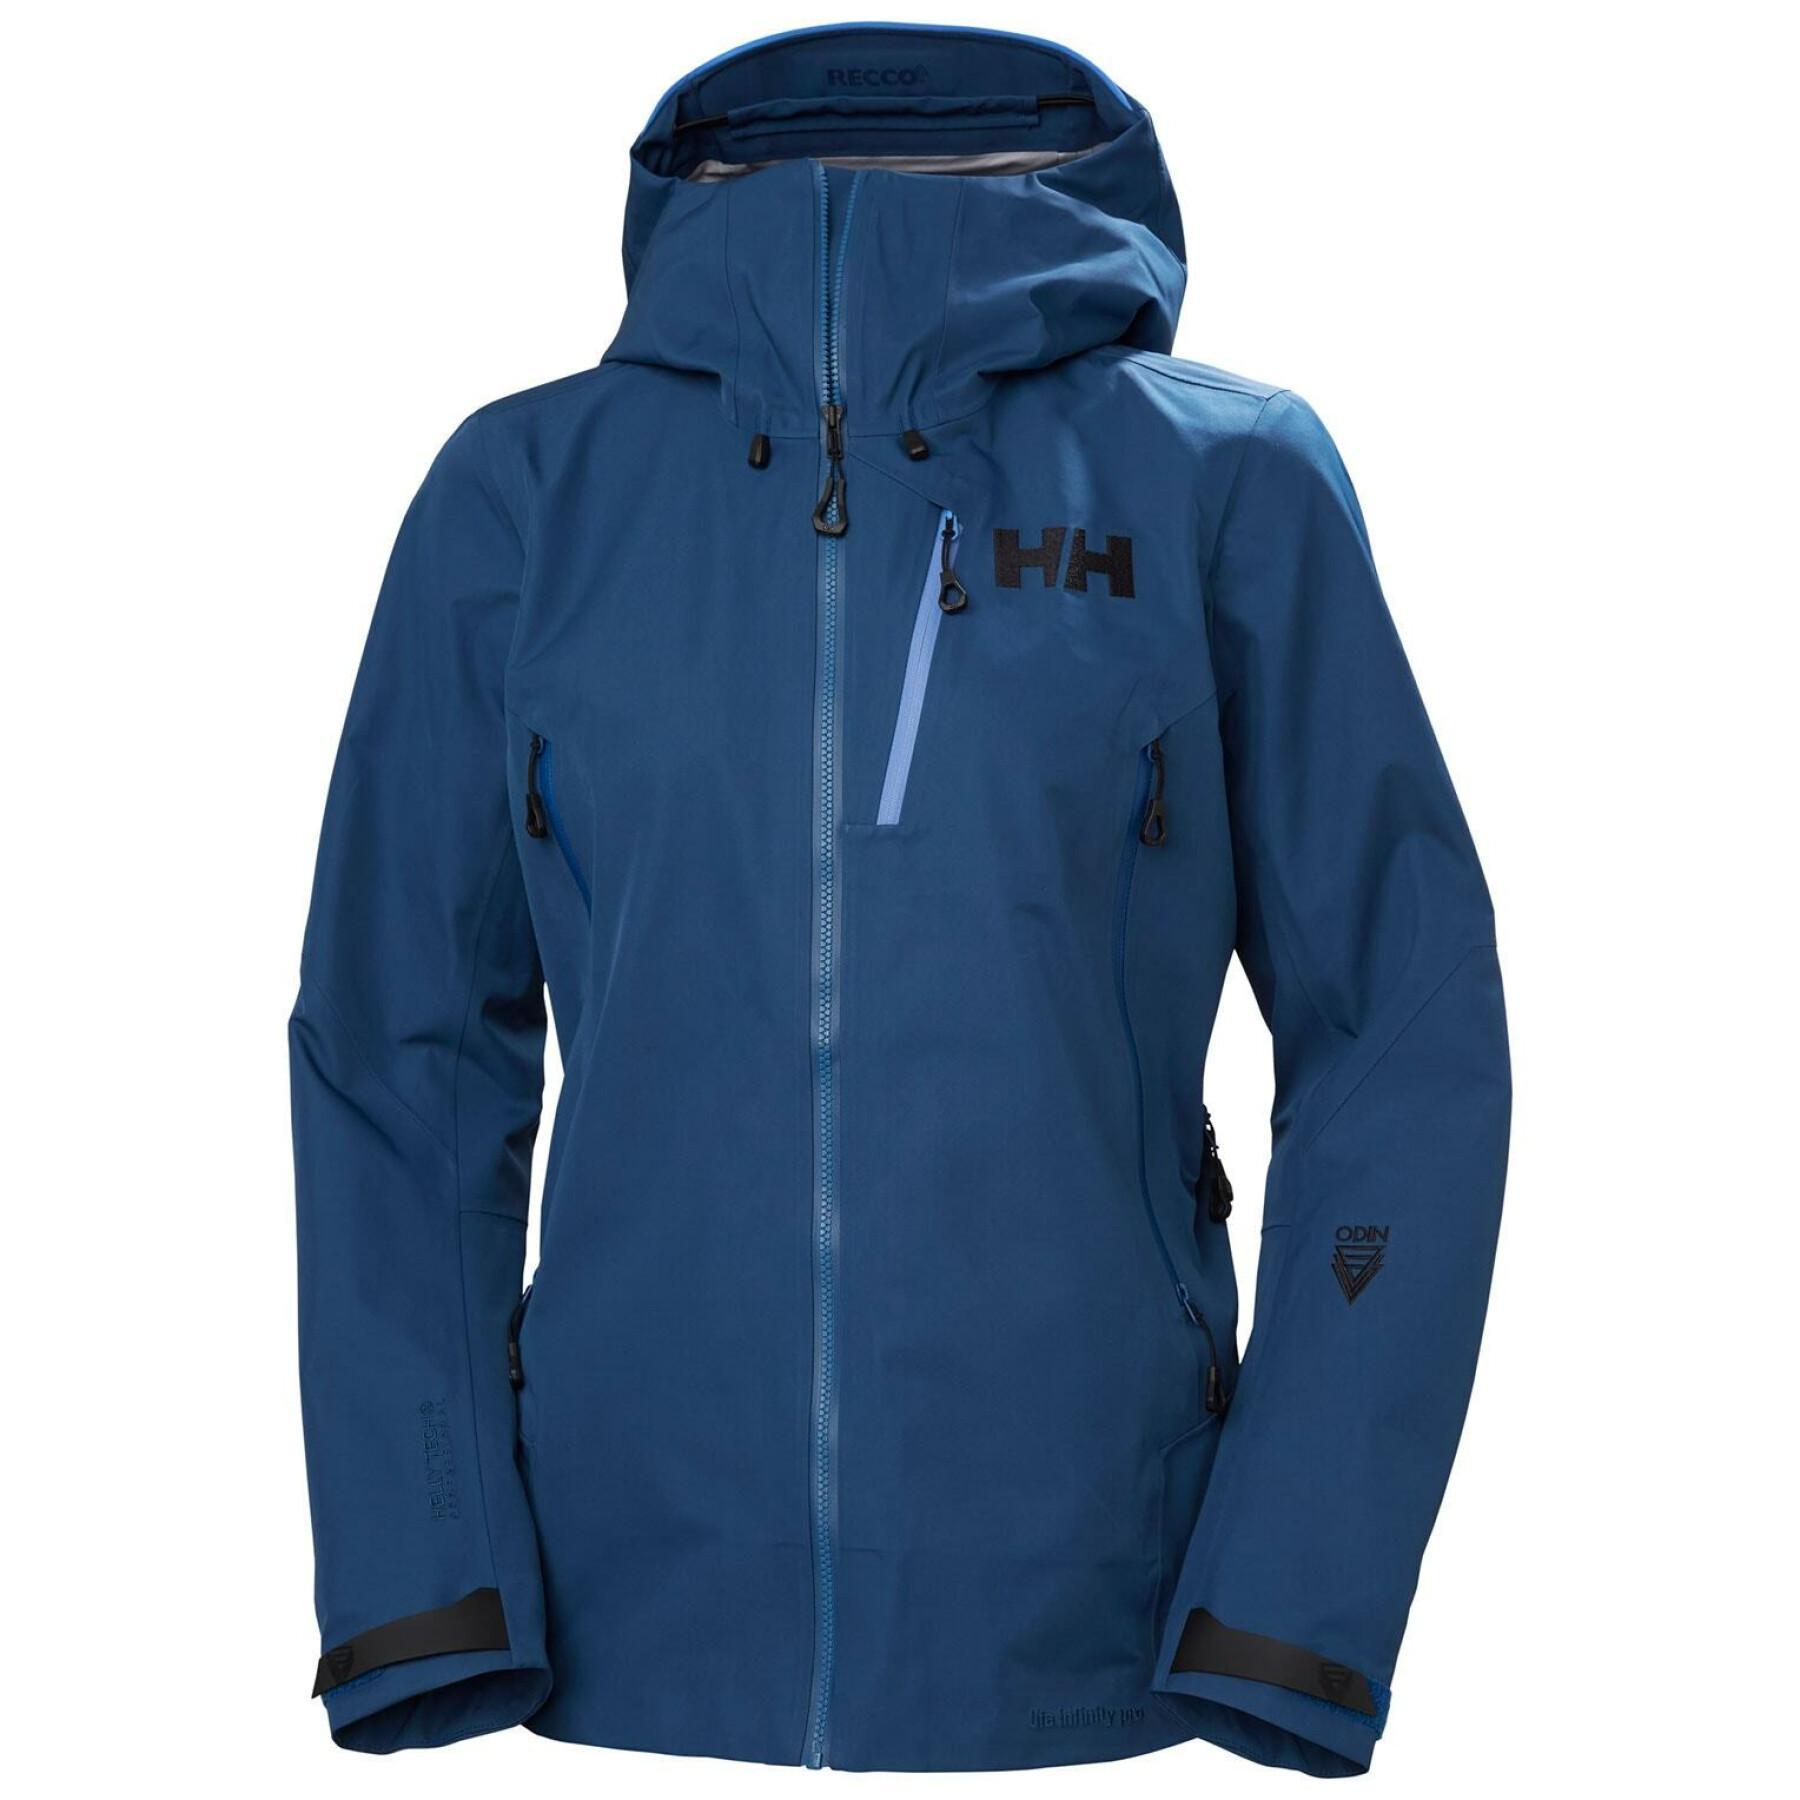 Chaqueta impermeable mujer Helly Hansen Odin 9 world infinity shell